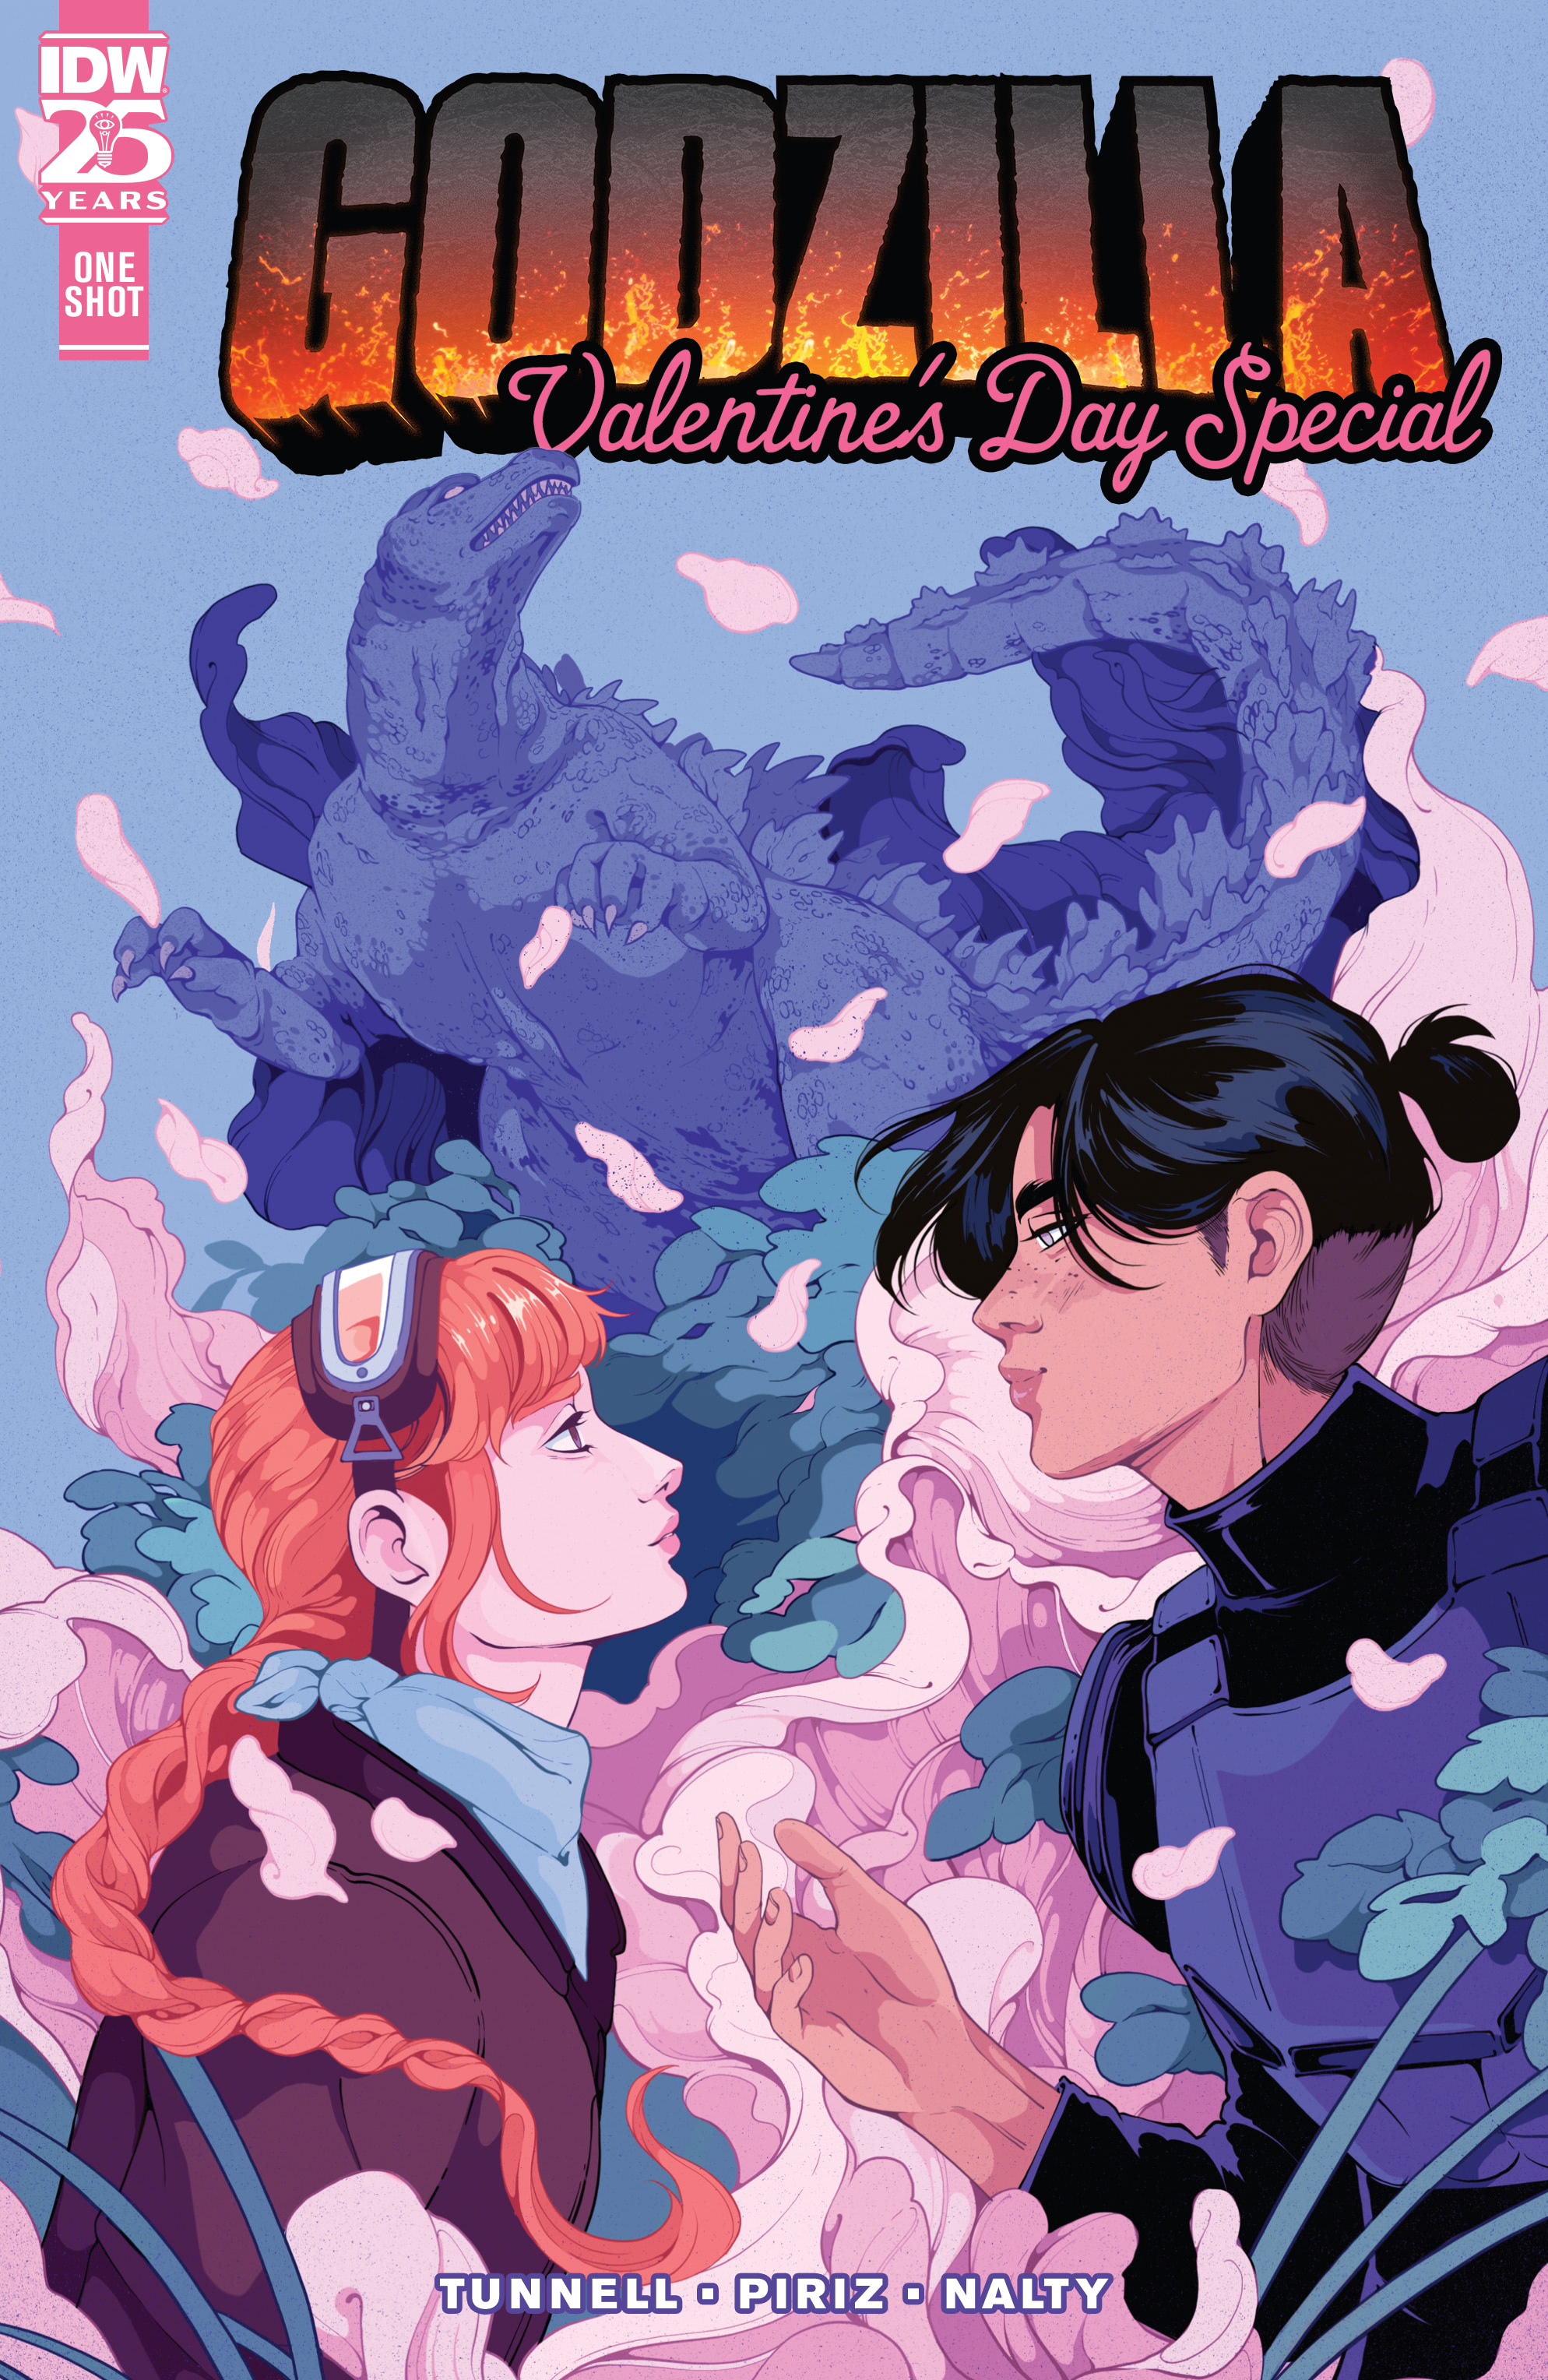 Read online Godzilla: Valentines Day Special comic -  Issue # Full - 1